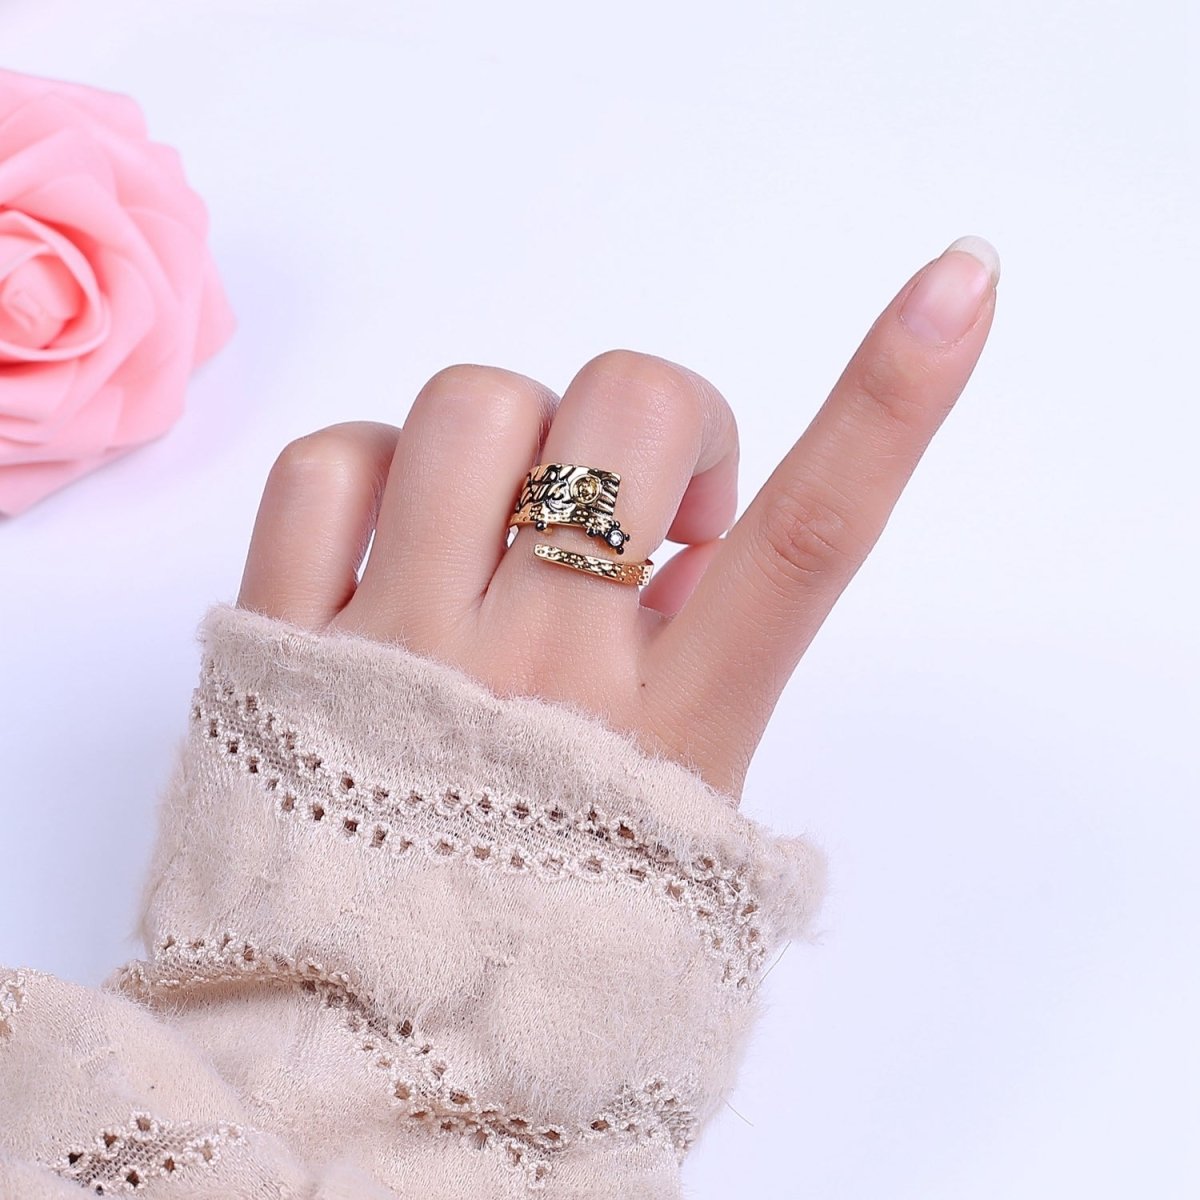 Irregular Gold Ring, Thick Band Gold Ring, Abstract Ring, Unique Design Ring Black Streetwear Cool Fashion Ring S-466 - DLUXCA